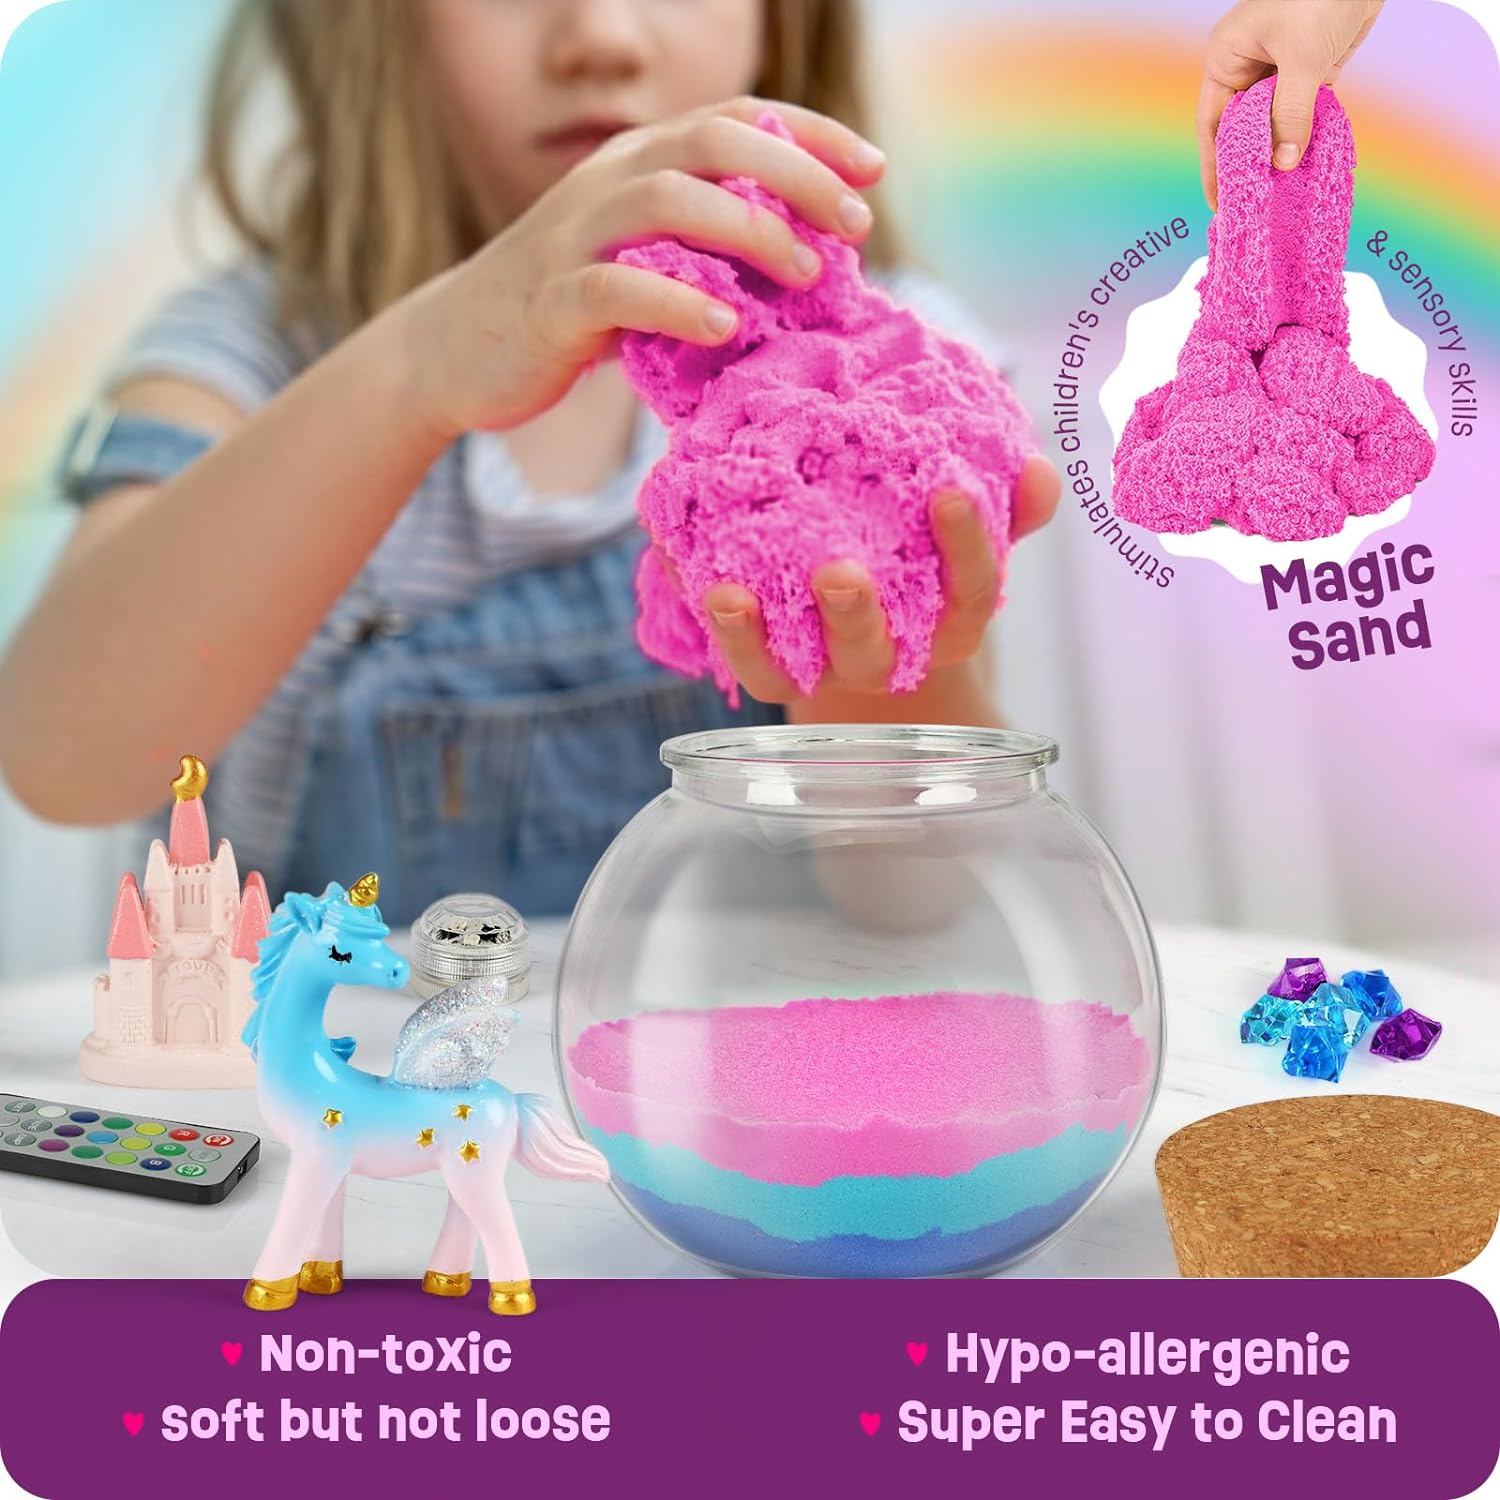 Unicorn Gifts for Girls - Unicorn Terrarium Kit for Kids -Unicorn Toys for Girls- Birthday Gift for Girls Ages 4 5 6 7 8 12 Year Old- Arts and Crafts Supplies for Kids-Best Present for Girl